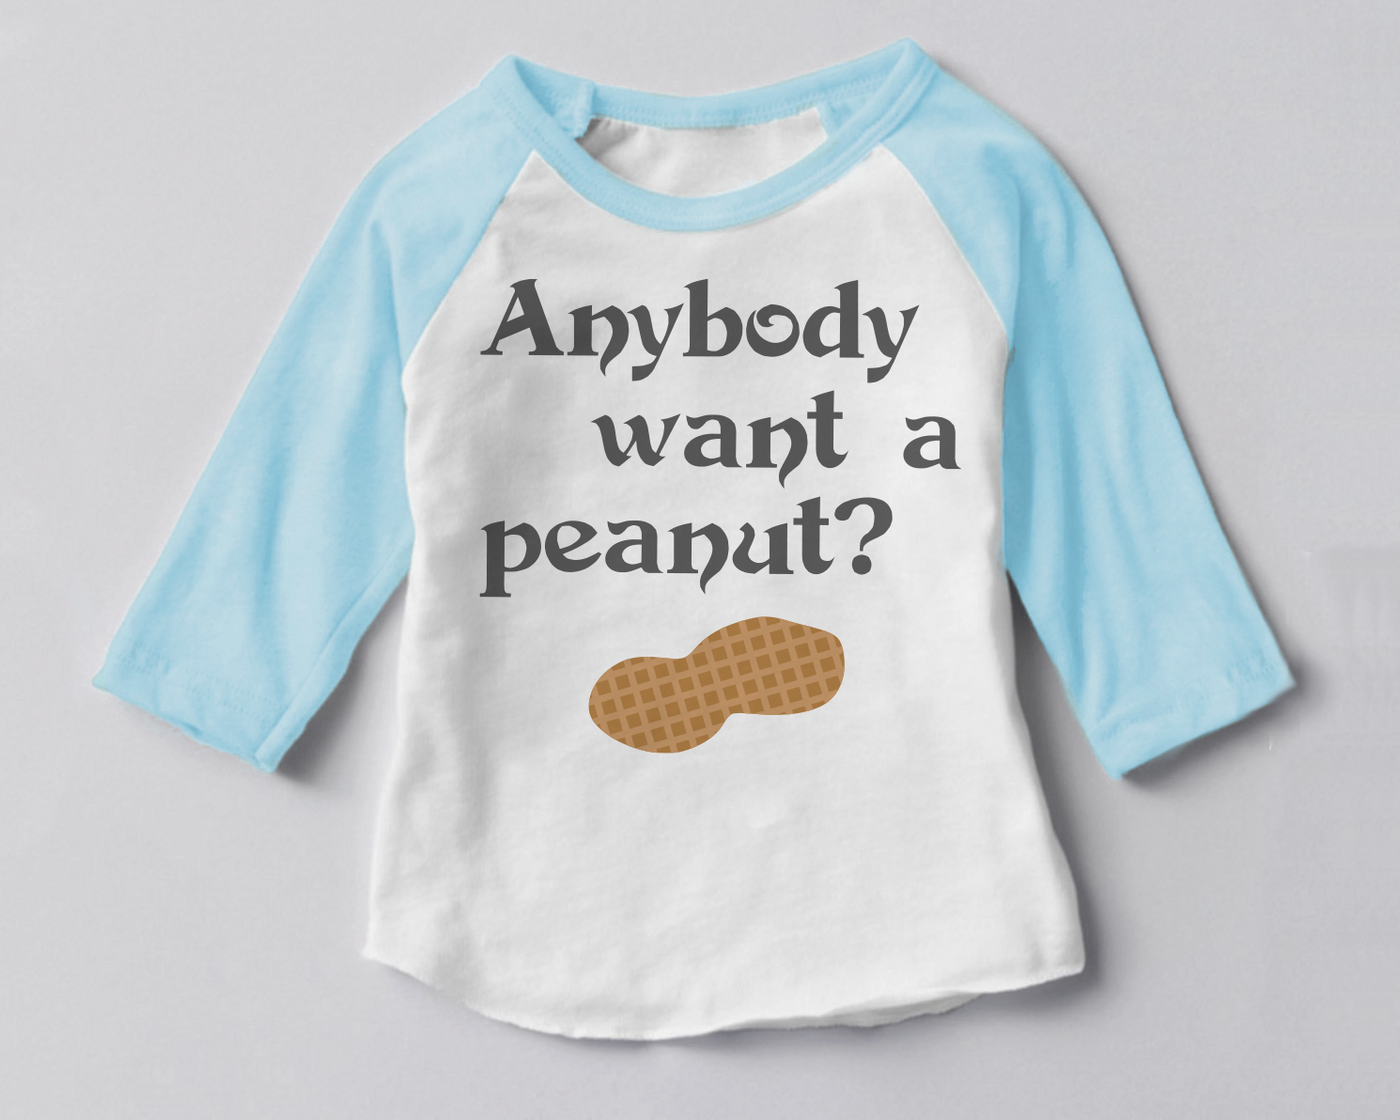 "Anybody want a peanut?" design with a peanut graphic